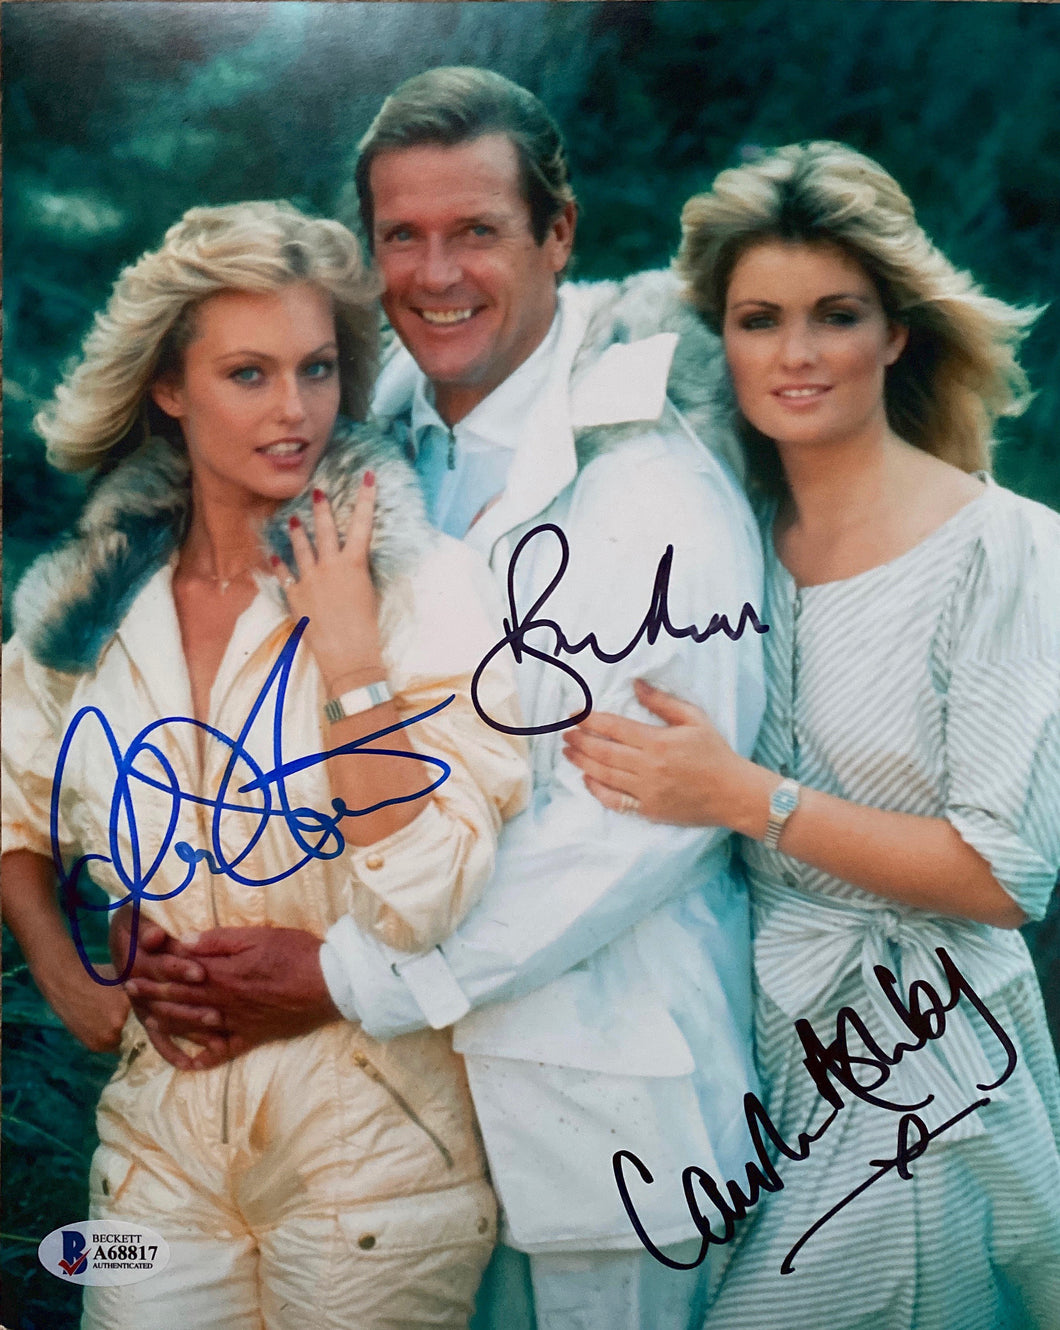 Roger Moore, Carole Ashby and Mary Stavin